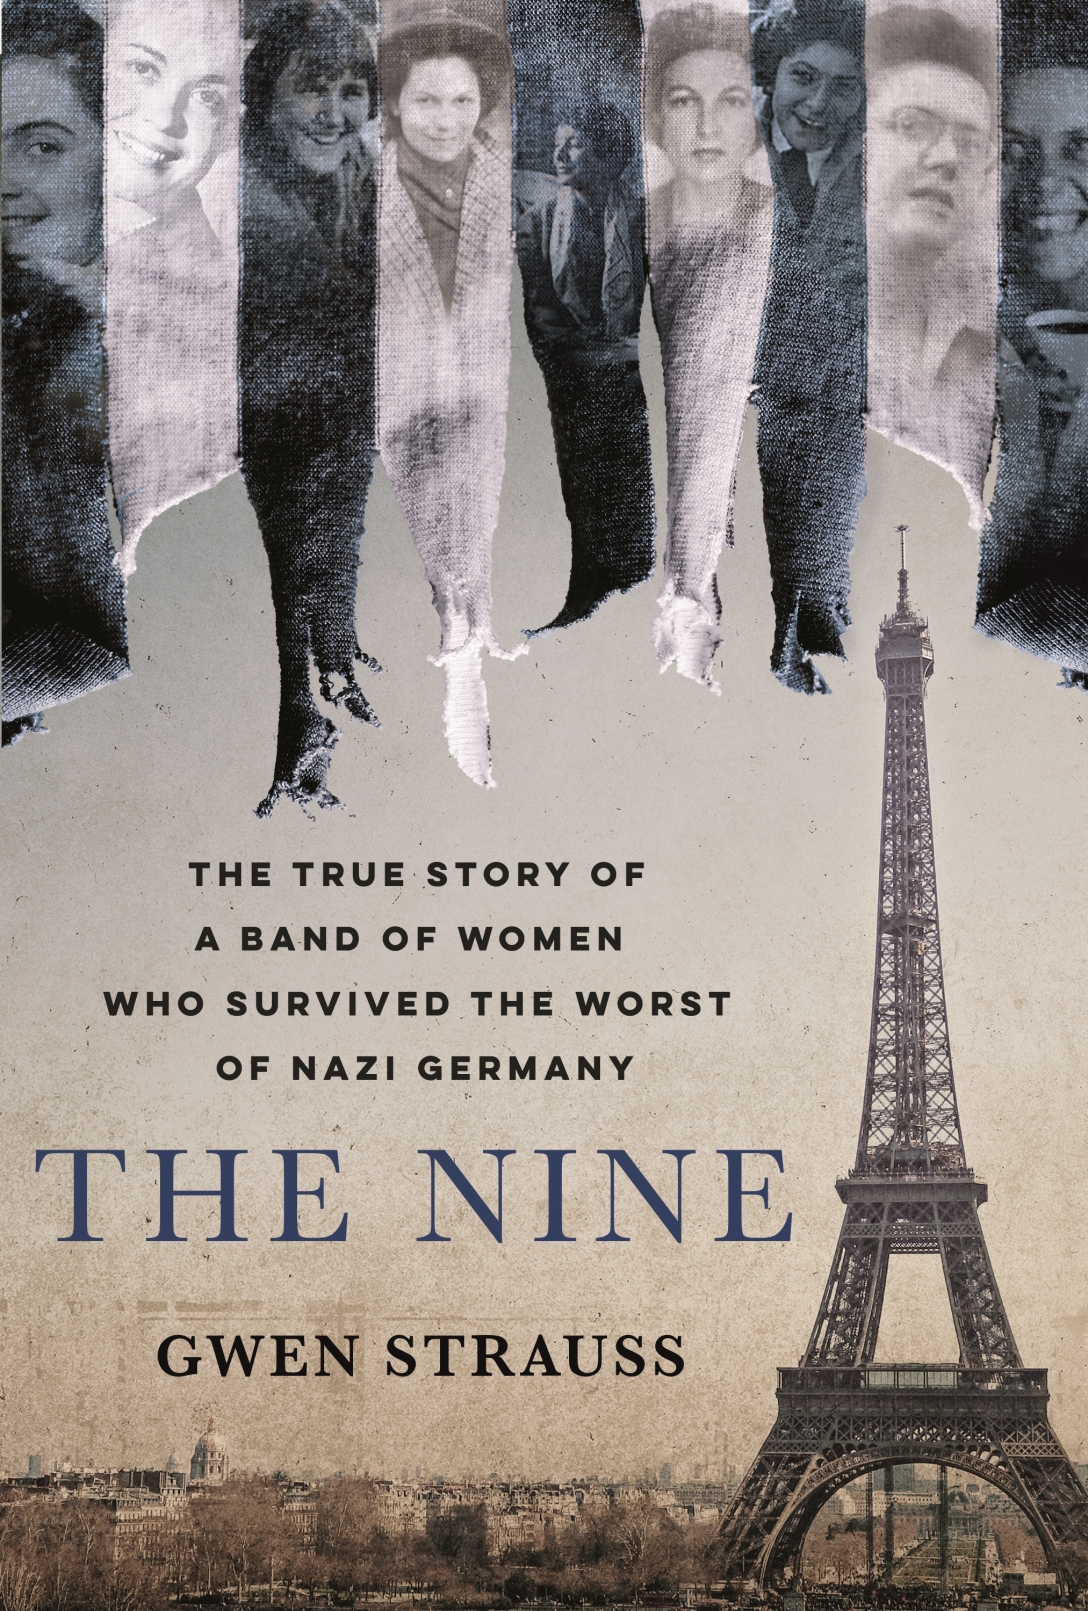 the cover of The Nine